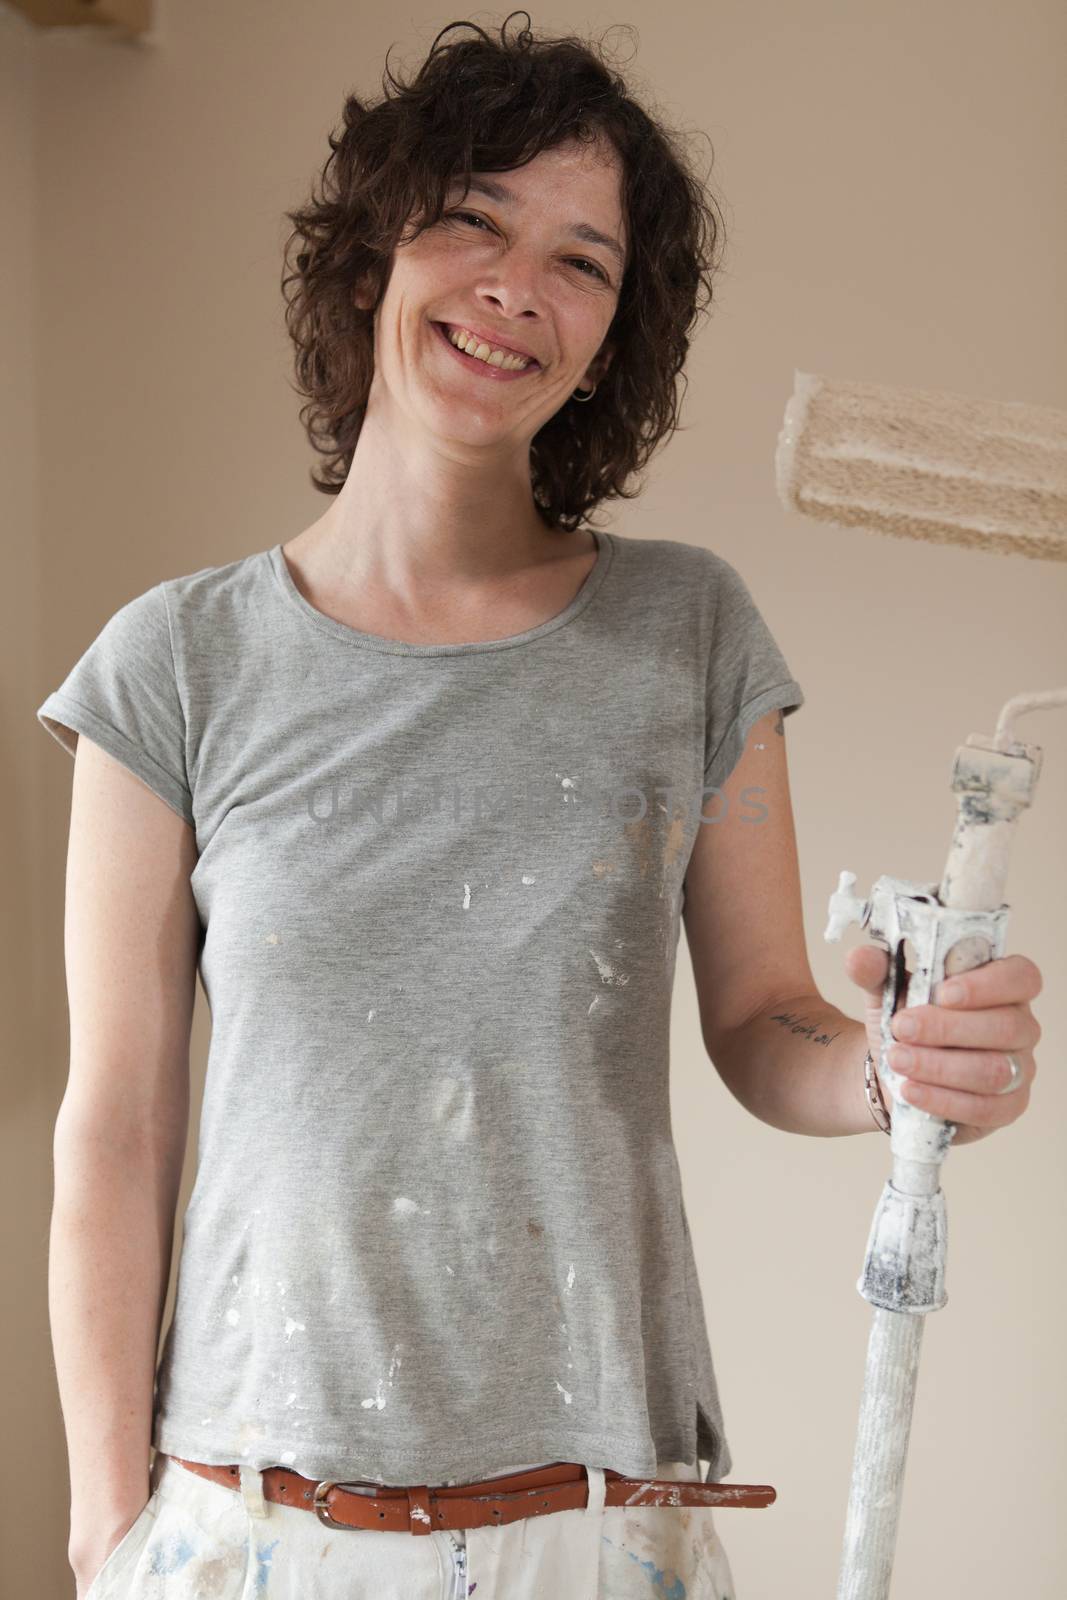 Professional working woman holding a paint brush roller at work